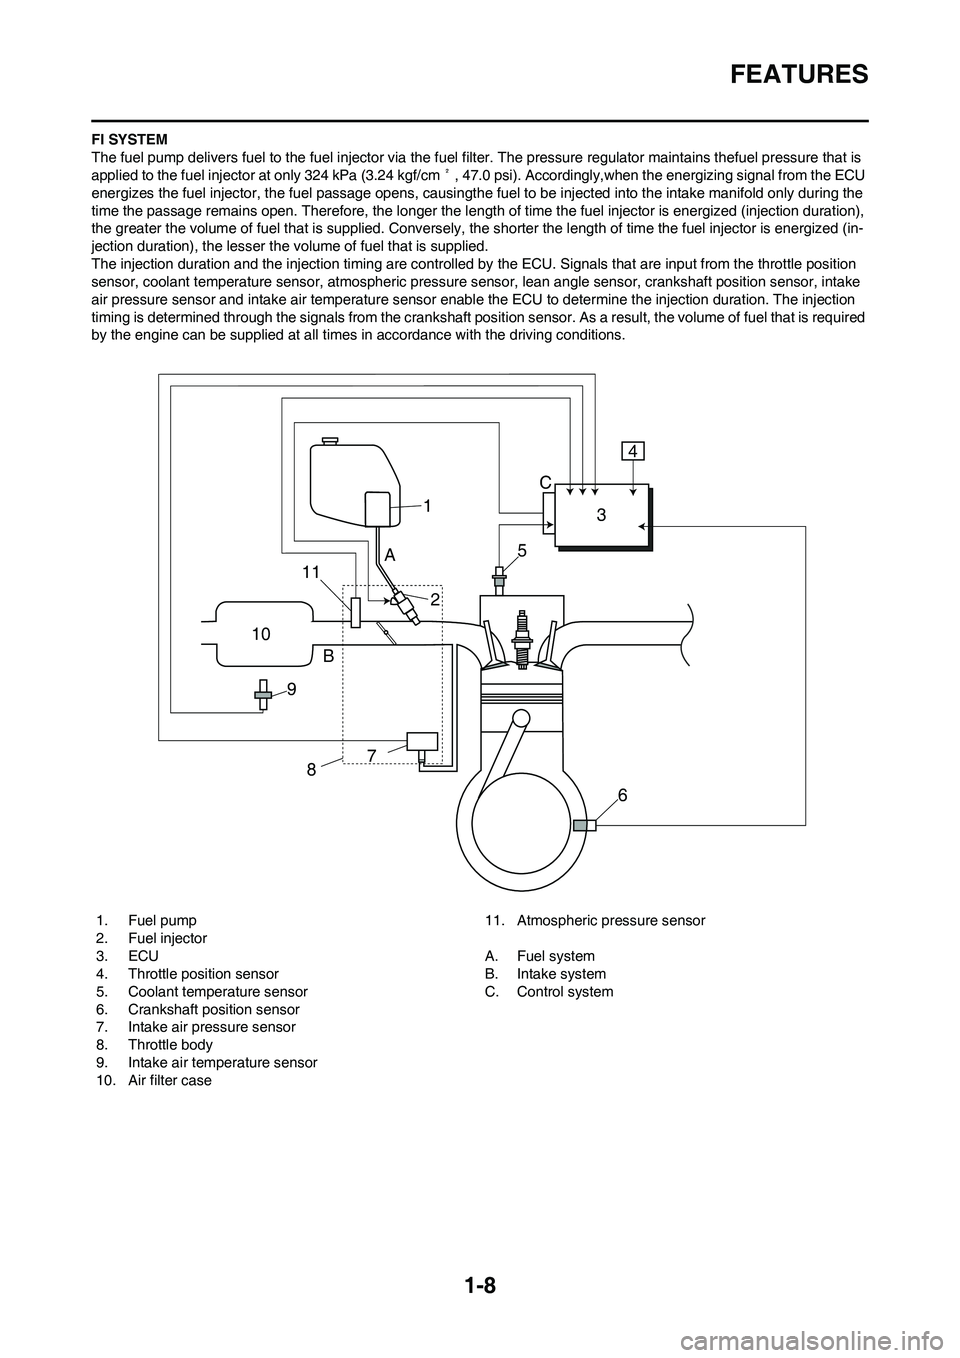 YAMAHA YZ450F 2010  Owners Manual 1-8
FEATURES
FI SYSTEM
The fuel pump delivers fuel to the fuel injector via the fuel filter. The pressure regulator maintains thefuel pressure that is 
applied to the fuel injector at only 324 kPa (3.